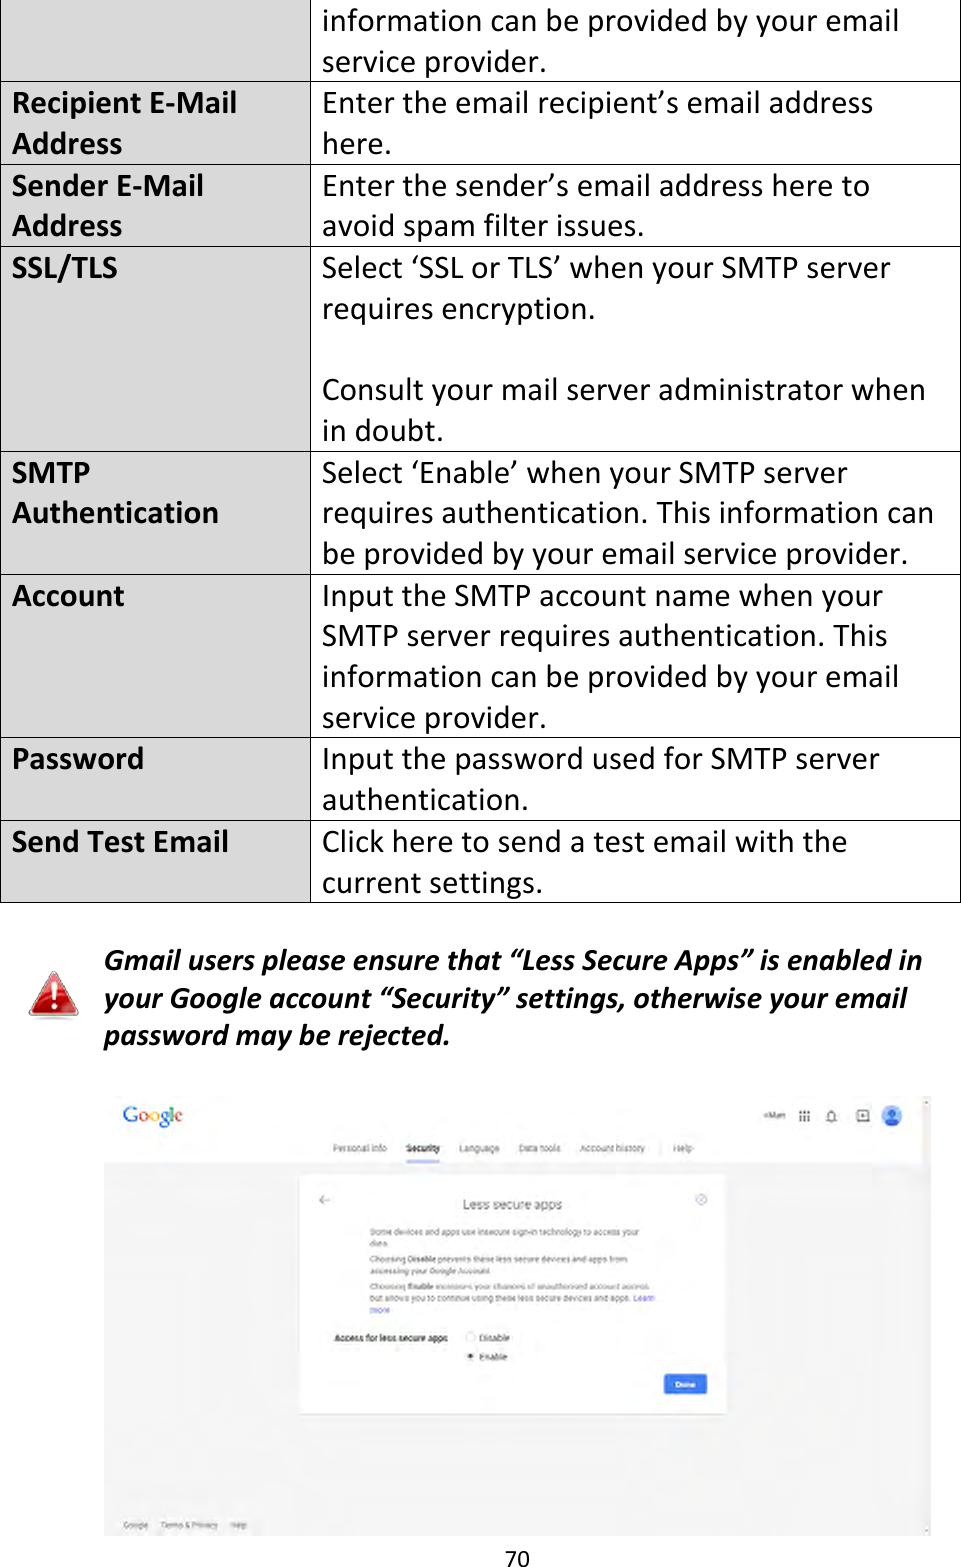 70  information can be provided by your email service provider. Recipient E-Mail Address Enter the email recipient’s email address here. Sender E-Mail Address Enter the sender’s email address here to avoid spam filter issues. SSL/TLS Select ‘SSL or TLS’ when your SMTP server requires encryption.   Consult your mail server administrator when in doubt. SMTP Authentication Select ‘Enable’ when your SMTP server requires authentication. This information can be provided by your email service provider. Account Input the SMTP account name when your SMTP server requires authentication. This information can be provided by your email service provider. Password Input the password used for SMTP server authentication. Send Test Email Click here to send a test email with the current settings.  Gmail users please ensure that “Less Secure Apps” is enabled in your Google account “Security” settings, otherwise your email password may be rejected.   